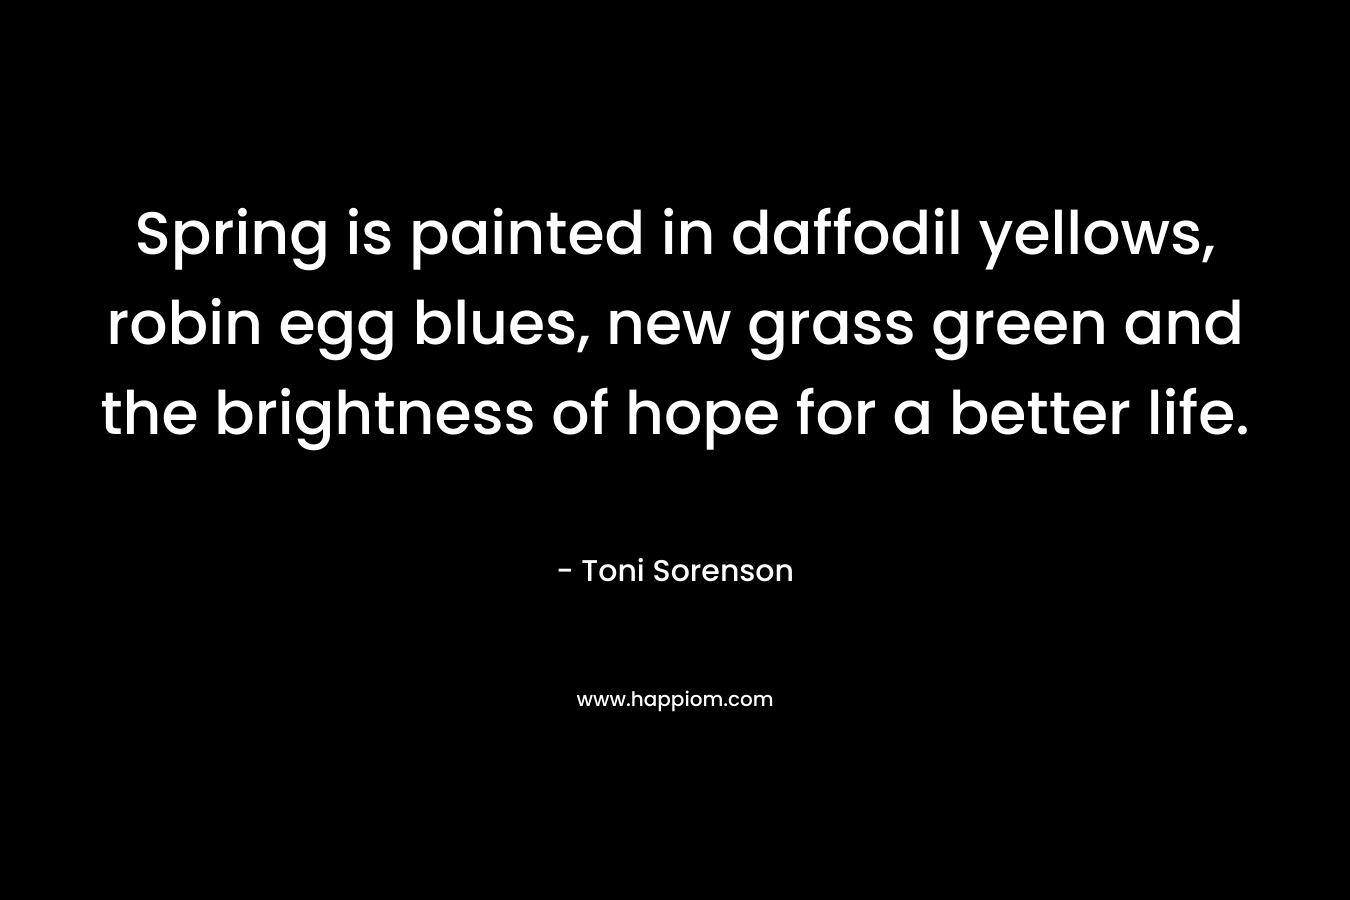 Spring is painted in daffodil yellows, robin egg blues, new grass green and the brightness of hope for a better life.